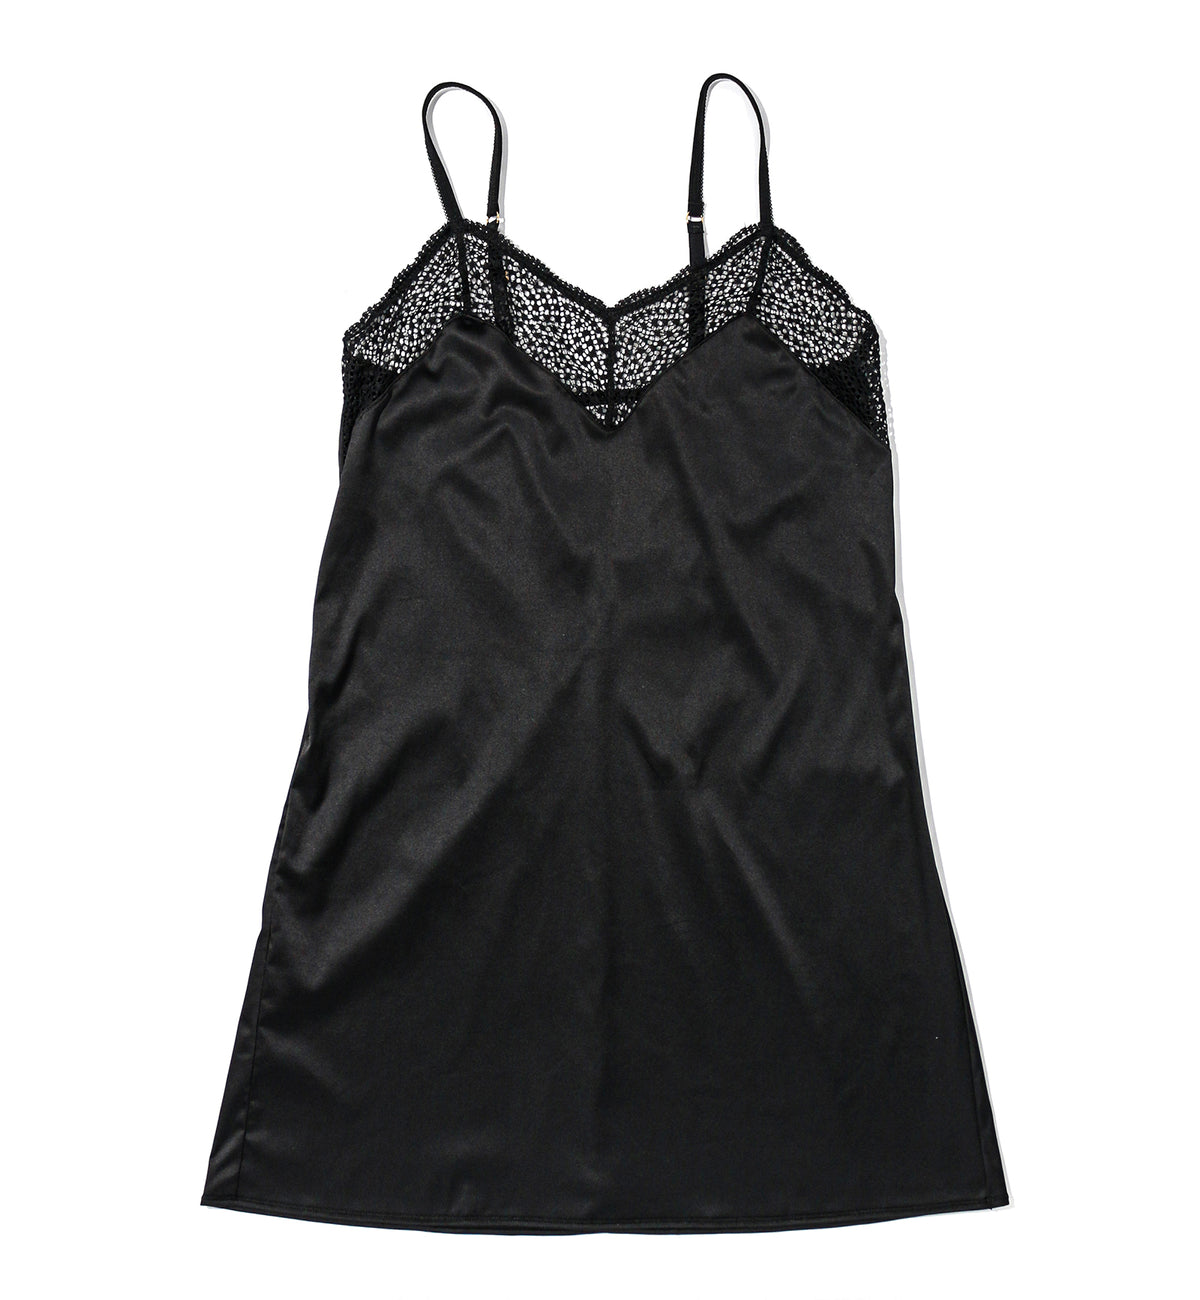 Hanky Panky Wrapped Around You Chemise (4D5706),Small,Black - Black,Small